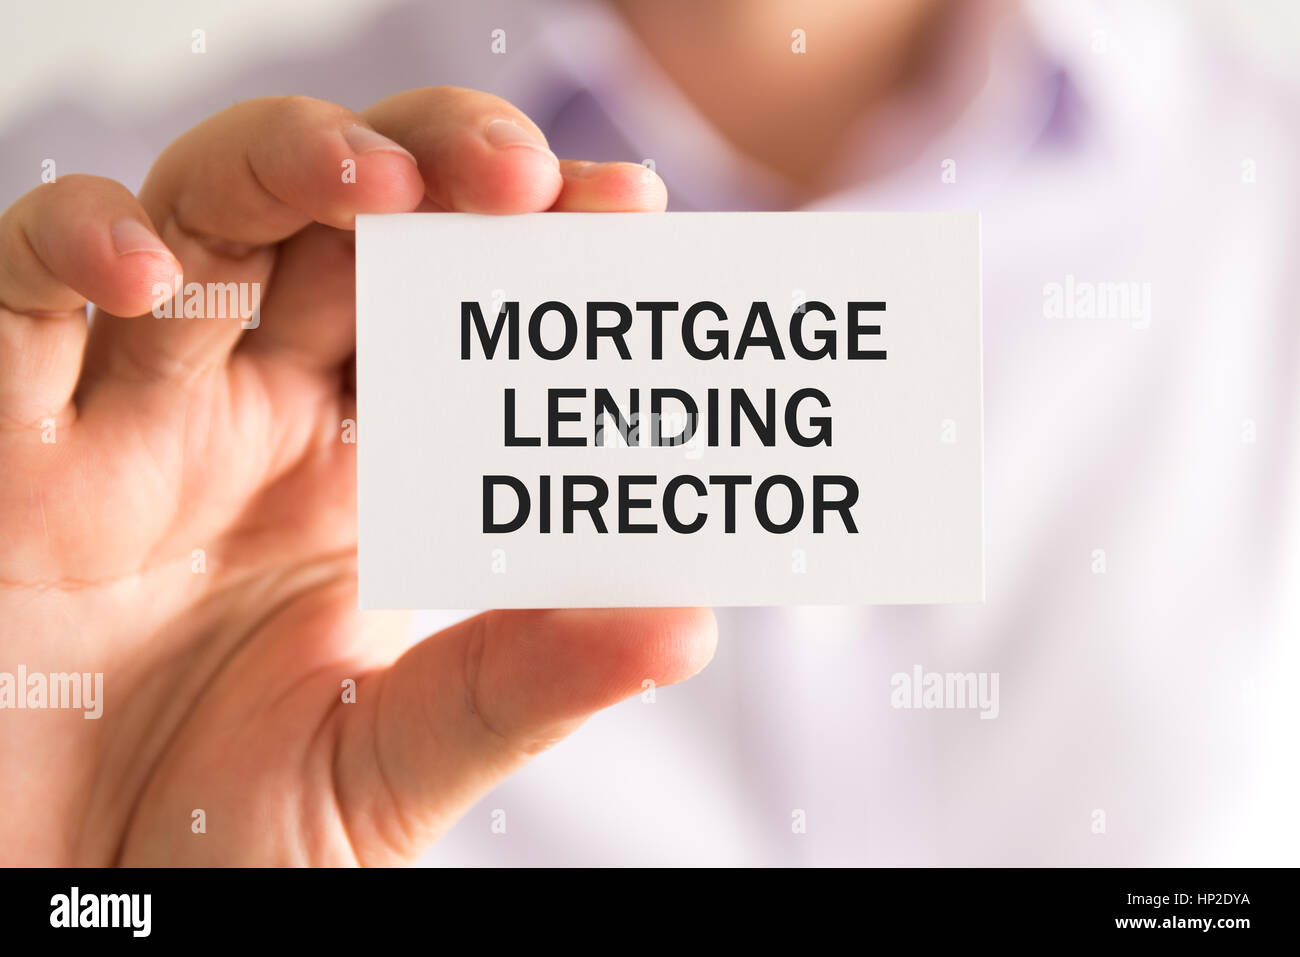 Closeup on businessman holding a card with text MORTGAGE LENDING DIRECTOR, business concept image with soft focus background Stock Photo